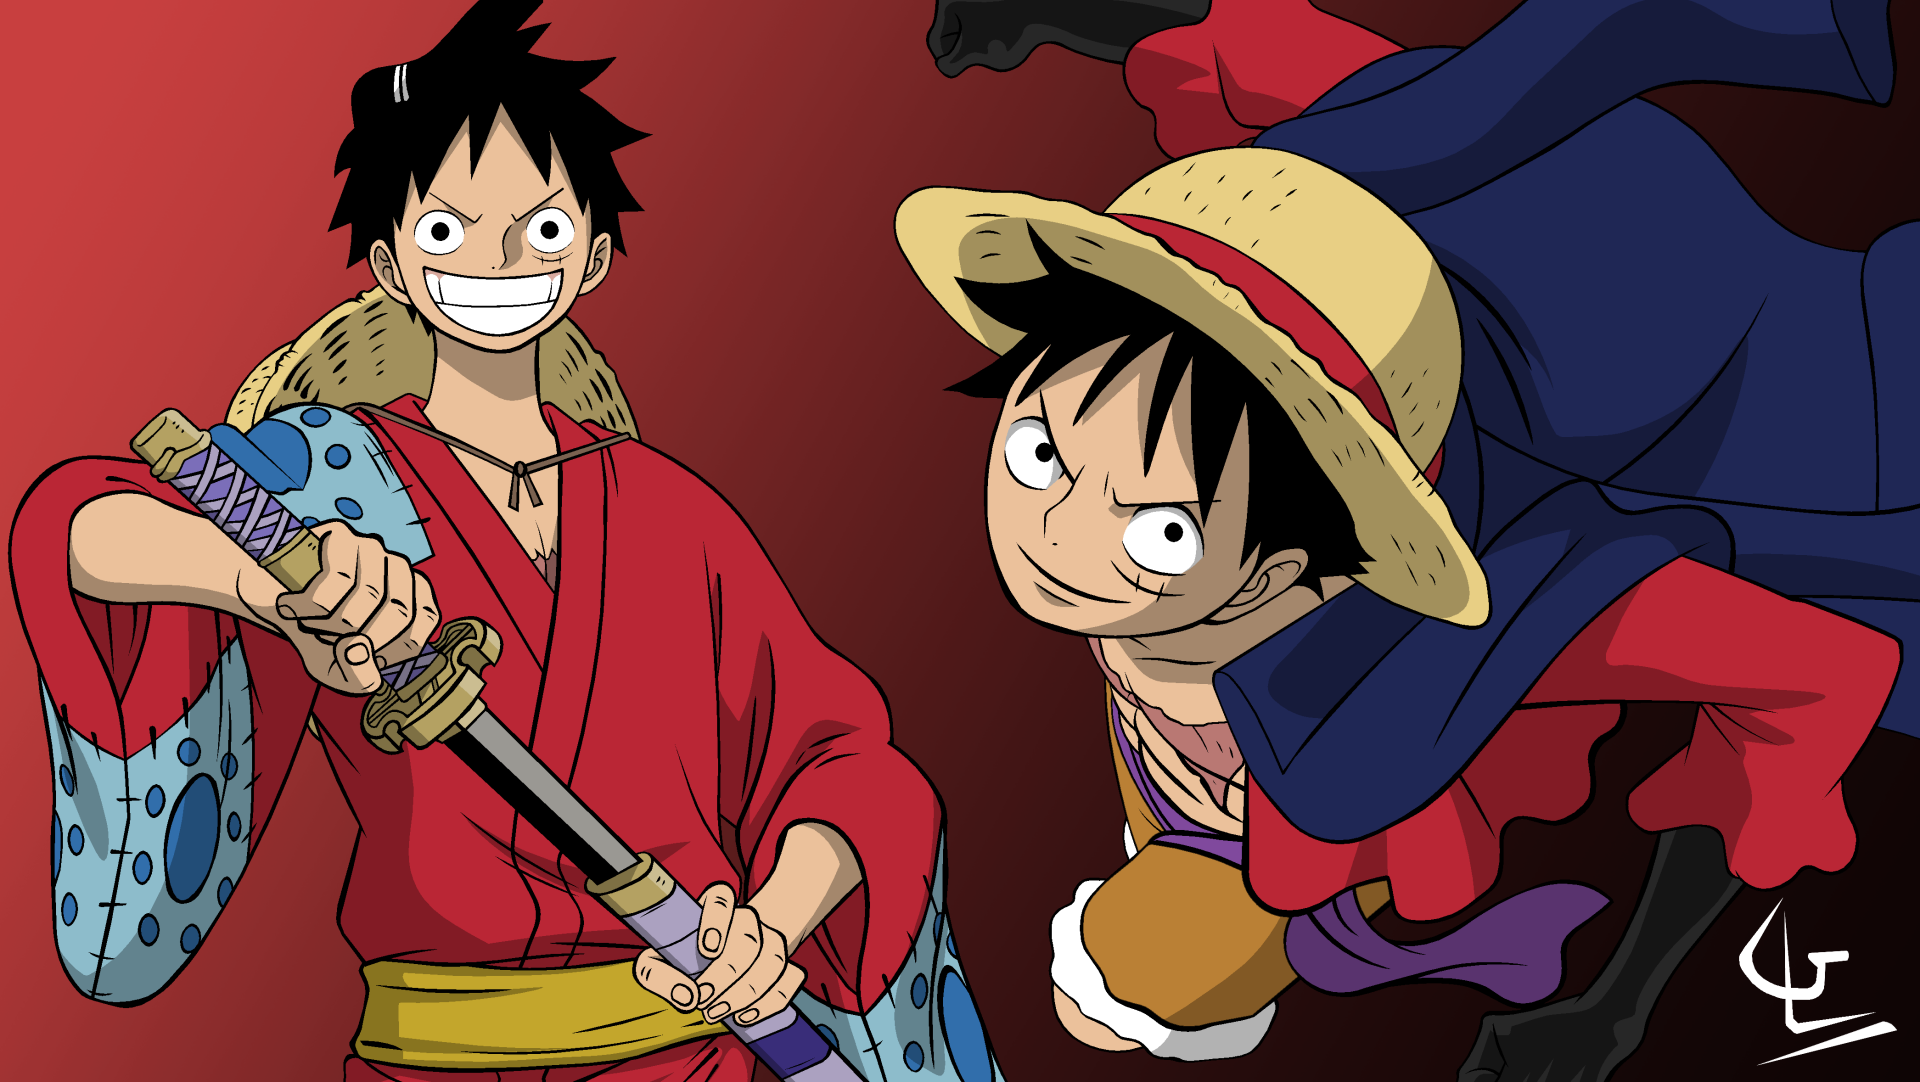 1920x1080 / 1920x1080 free high resolution wallpaper one piece JPG 296 kB -  Coolwallpapers.me!